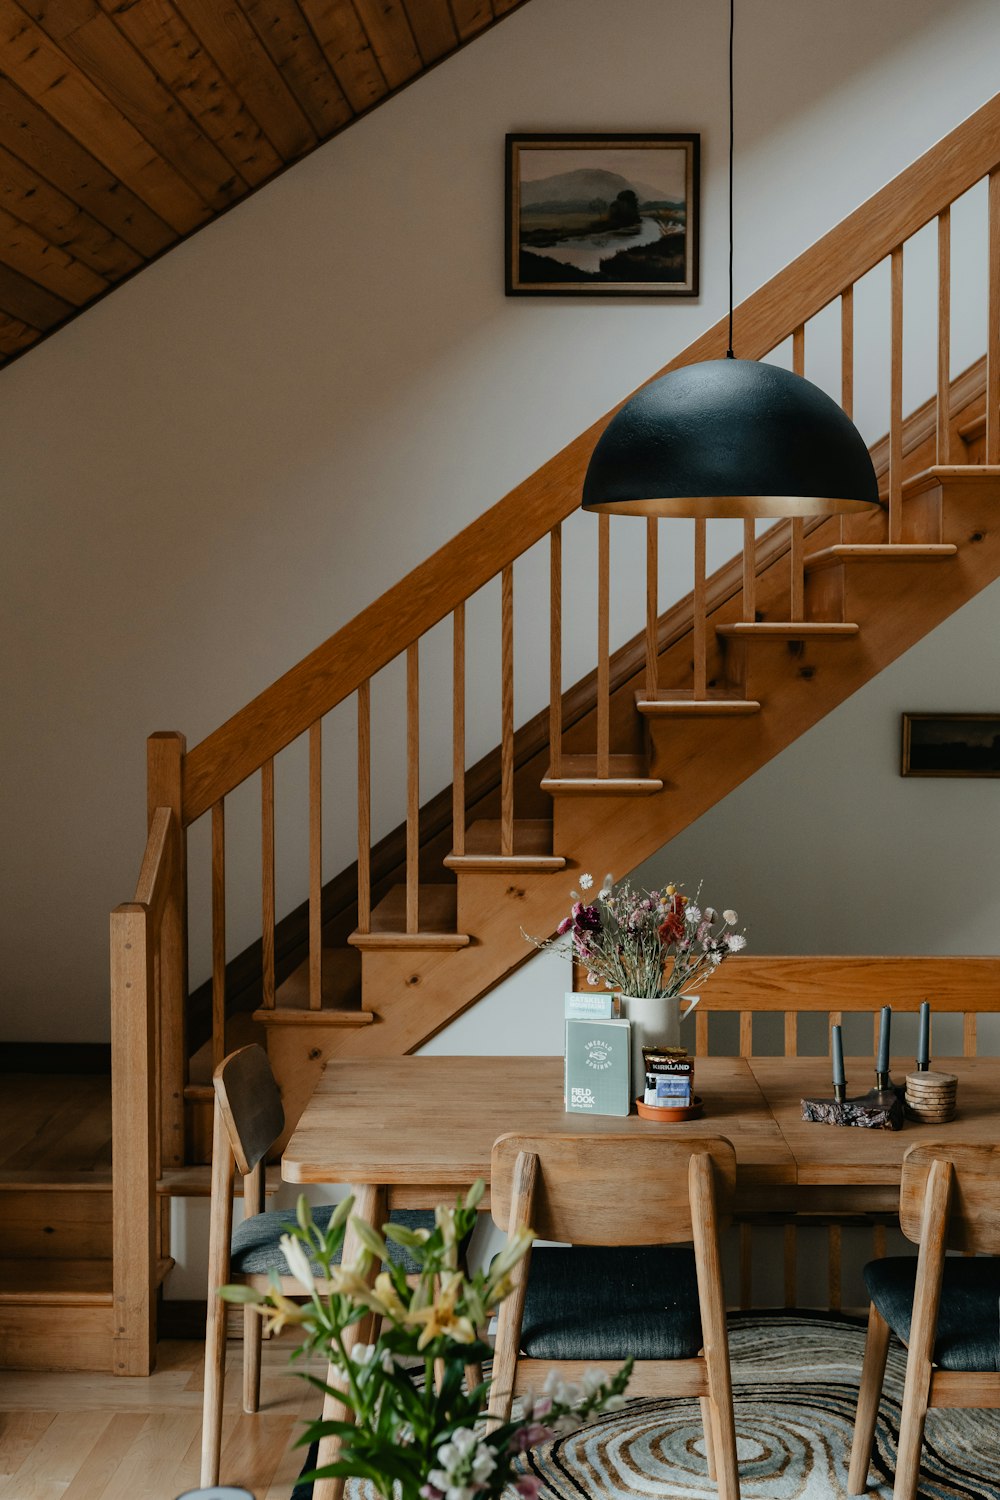 a wooden table sitting under a stair case